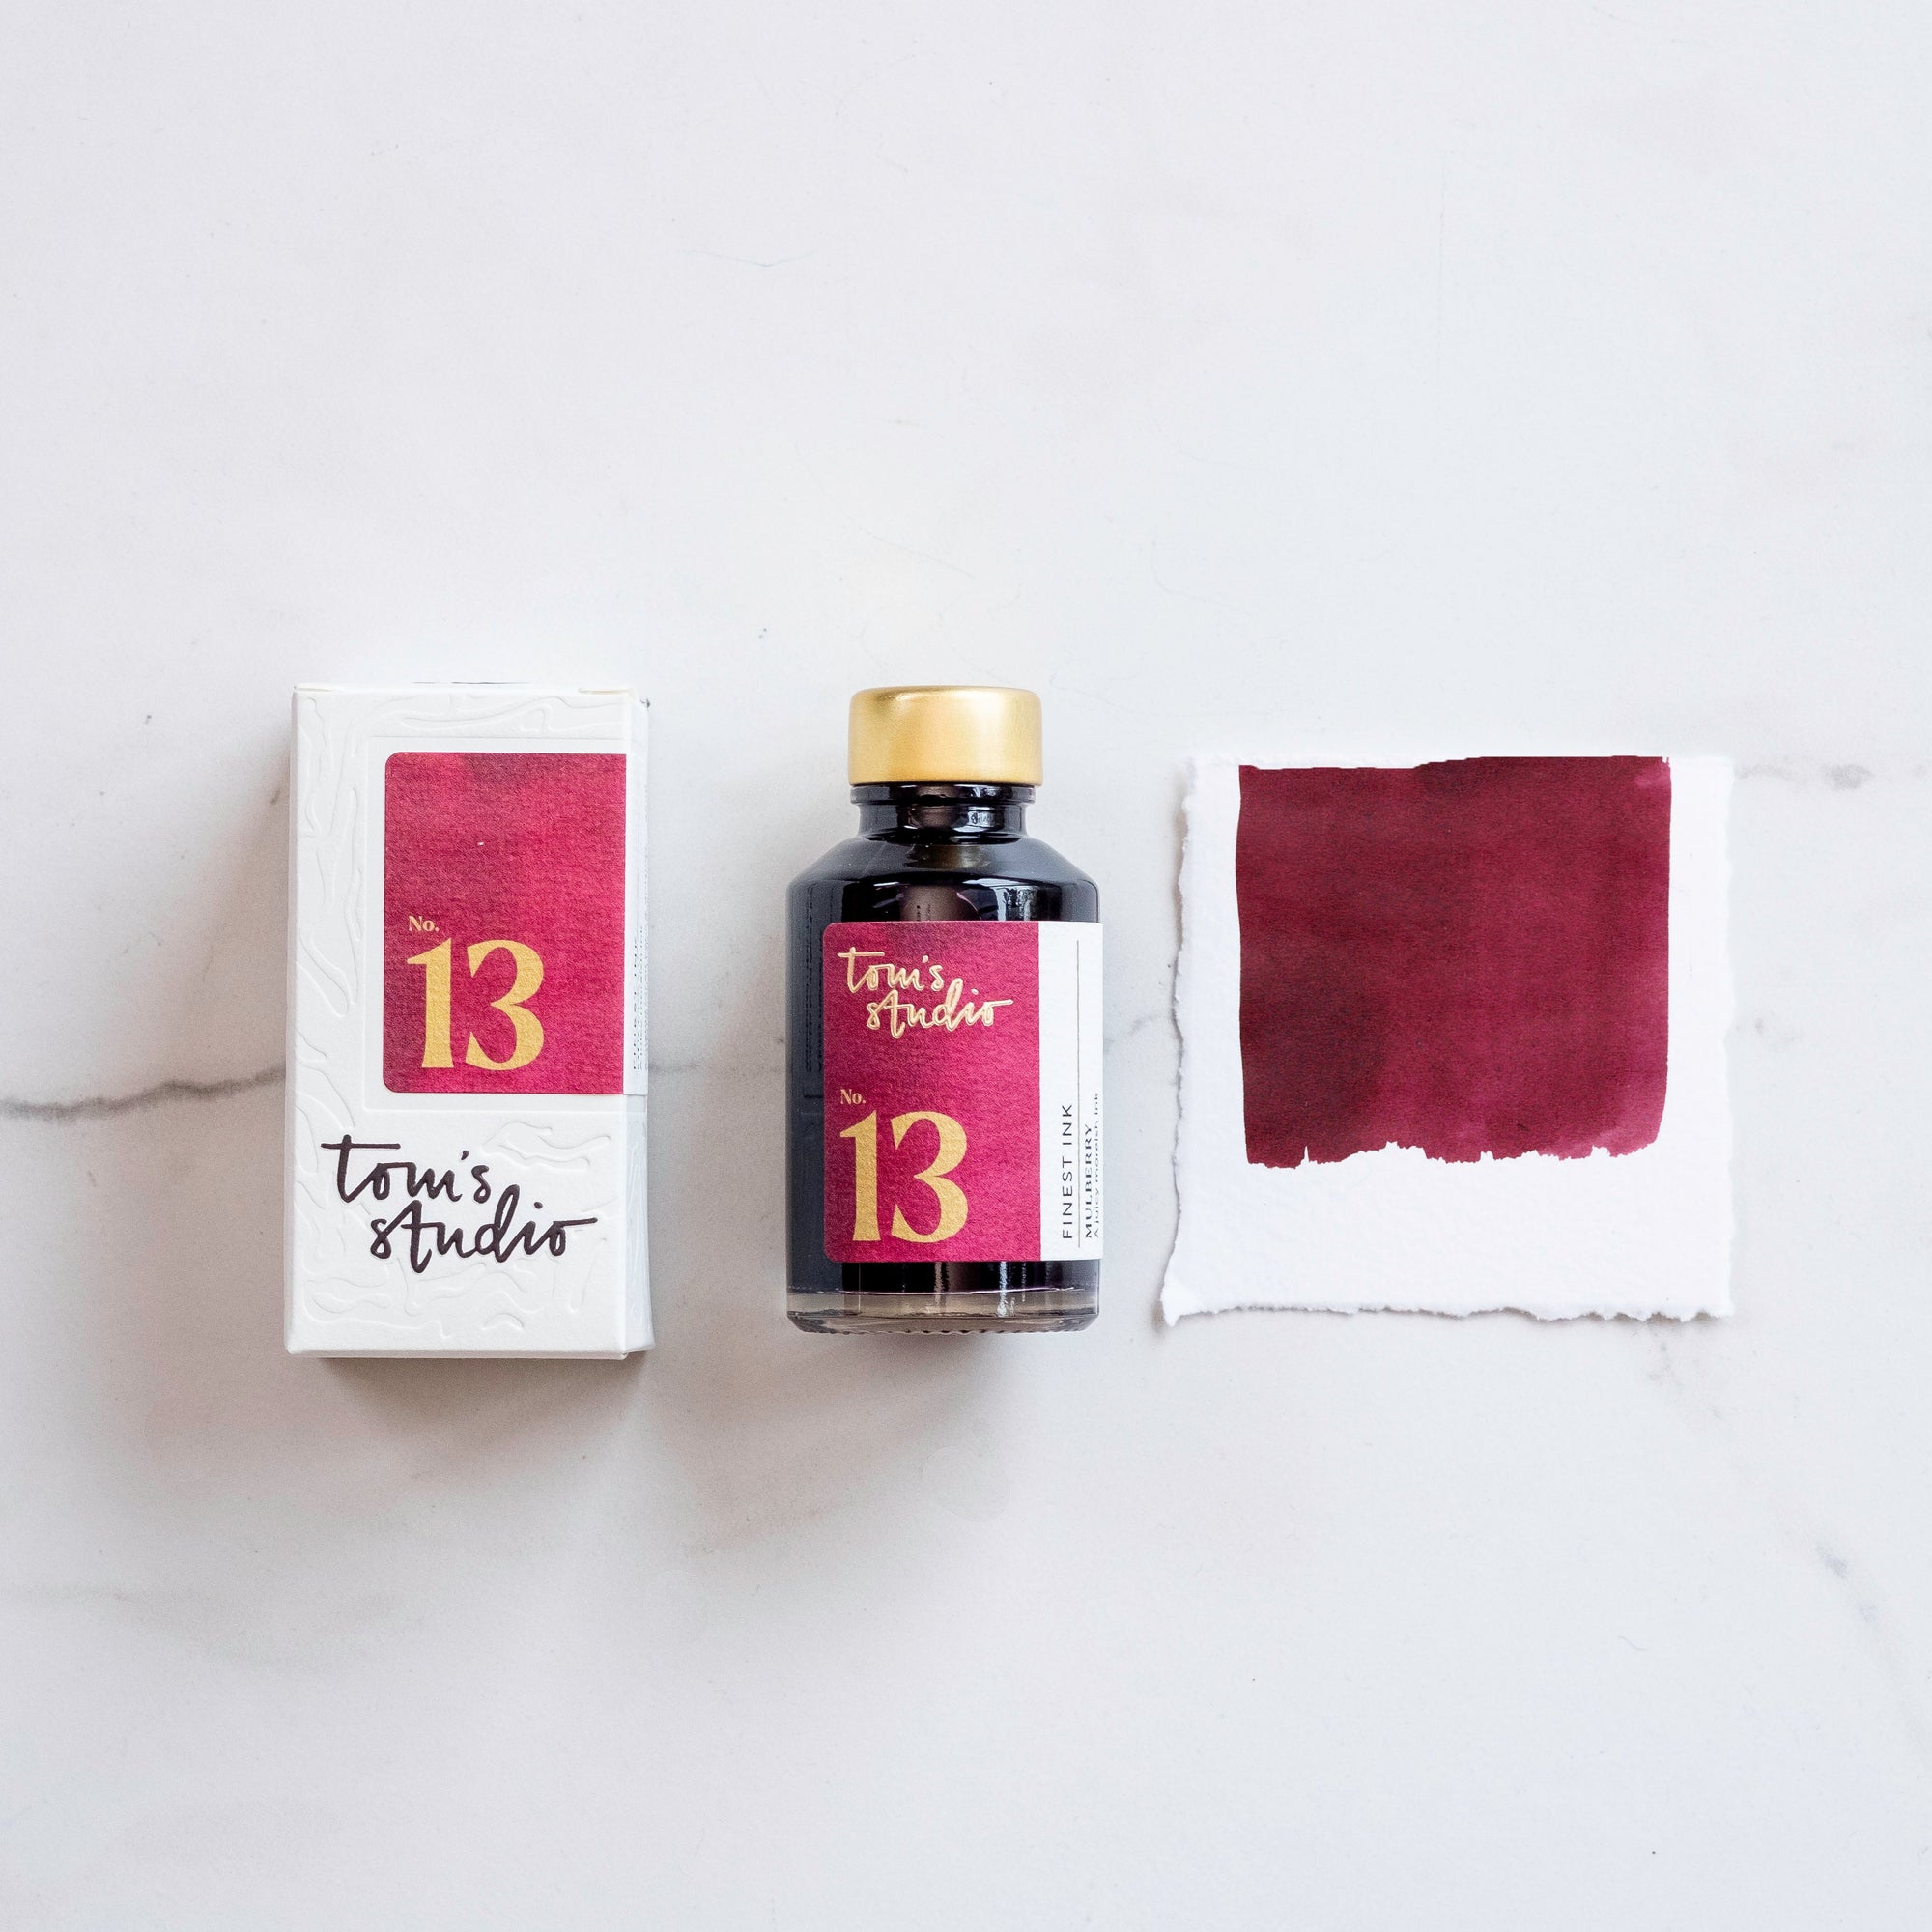 Tom's Studio Mulberry Fountain Pen Ink with two pens with inky goodness on paper with an ink swatch demonstrating the colour